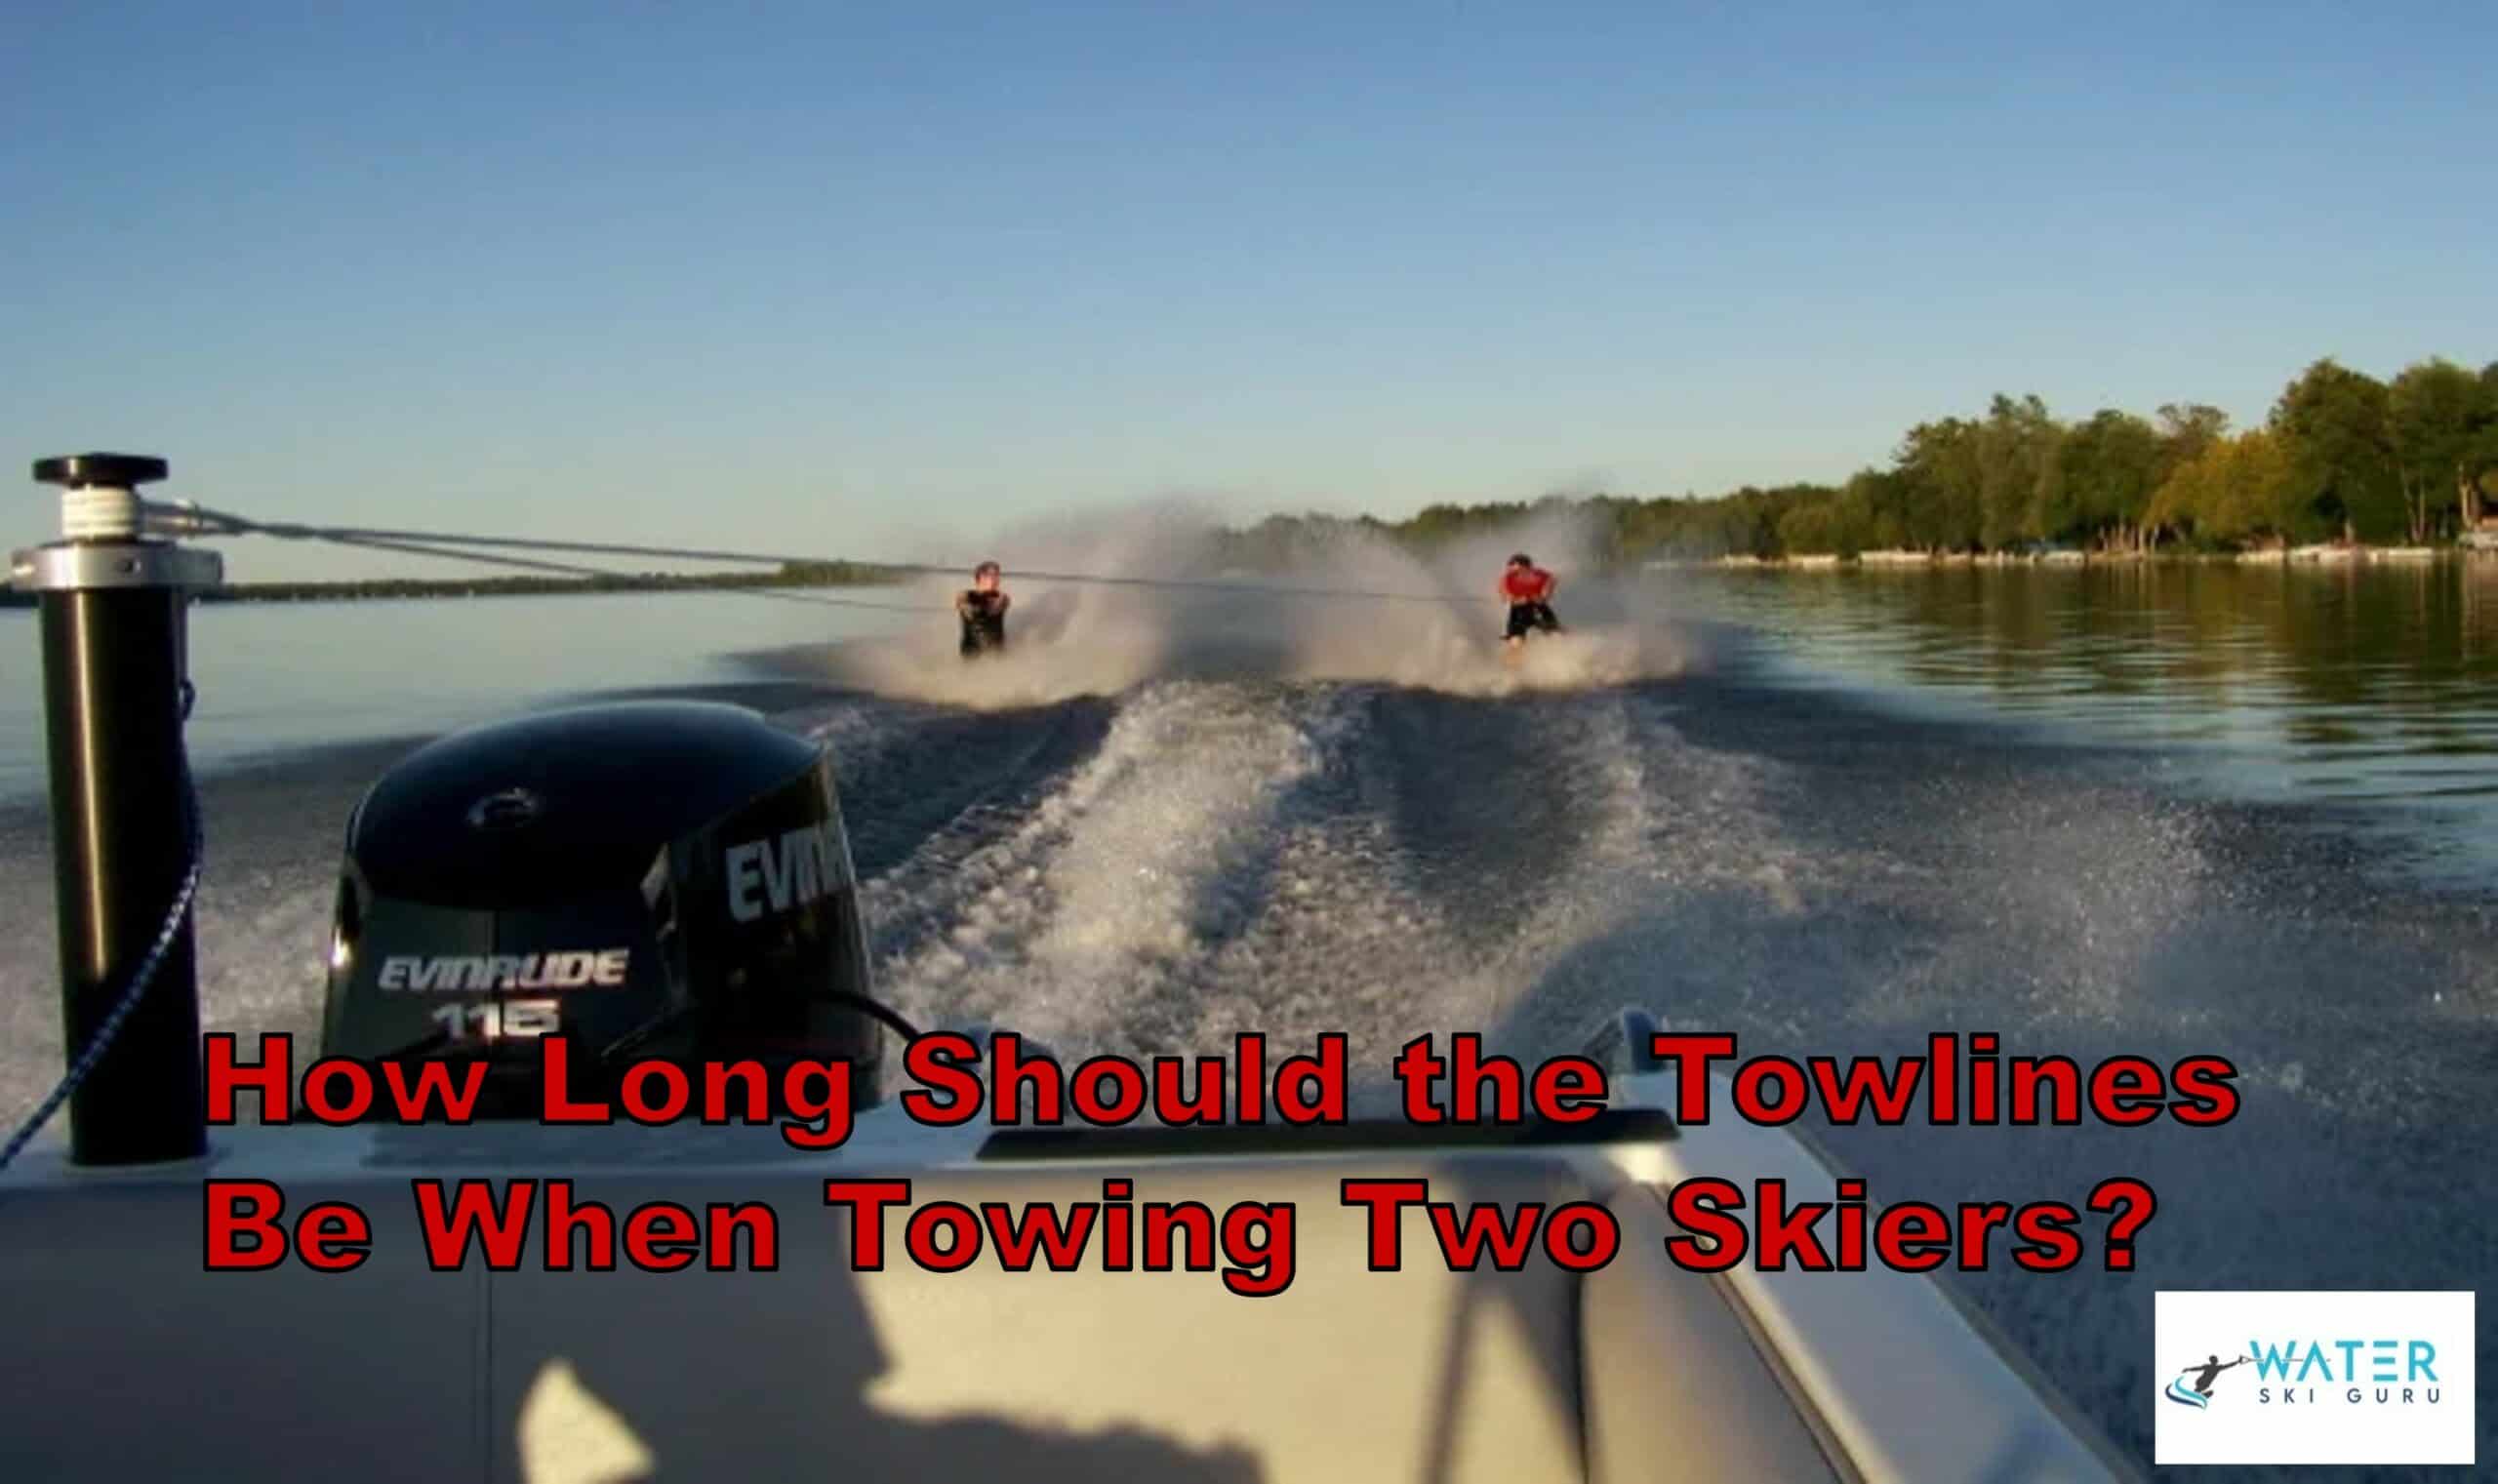 How Long Should the Towlines Be When Towing Two Skiers